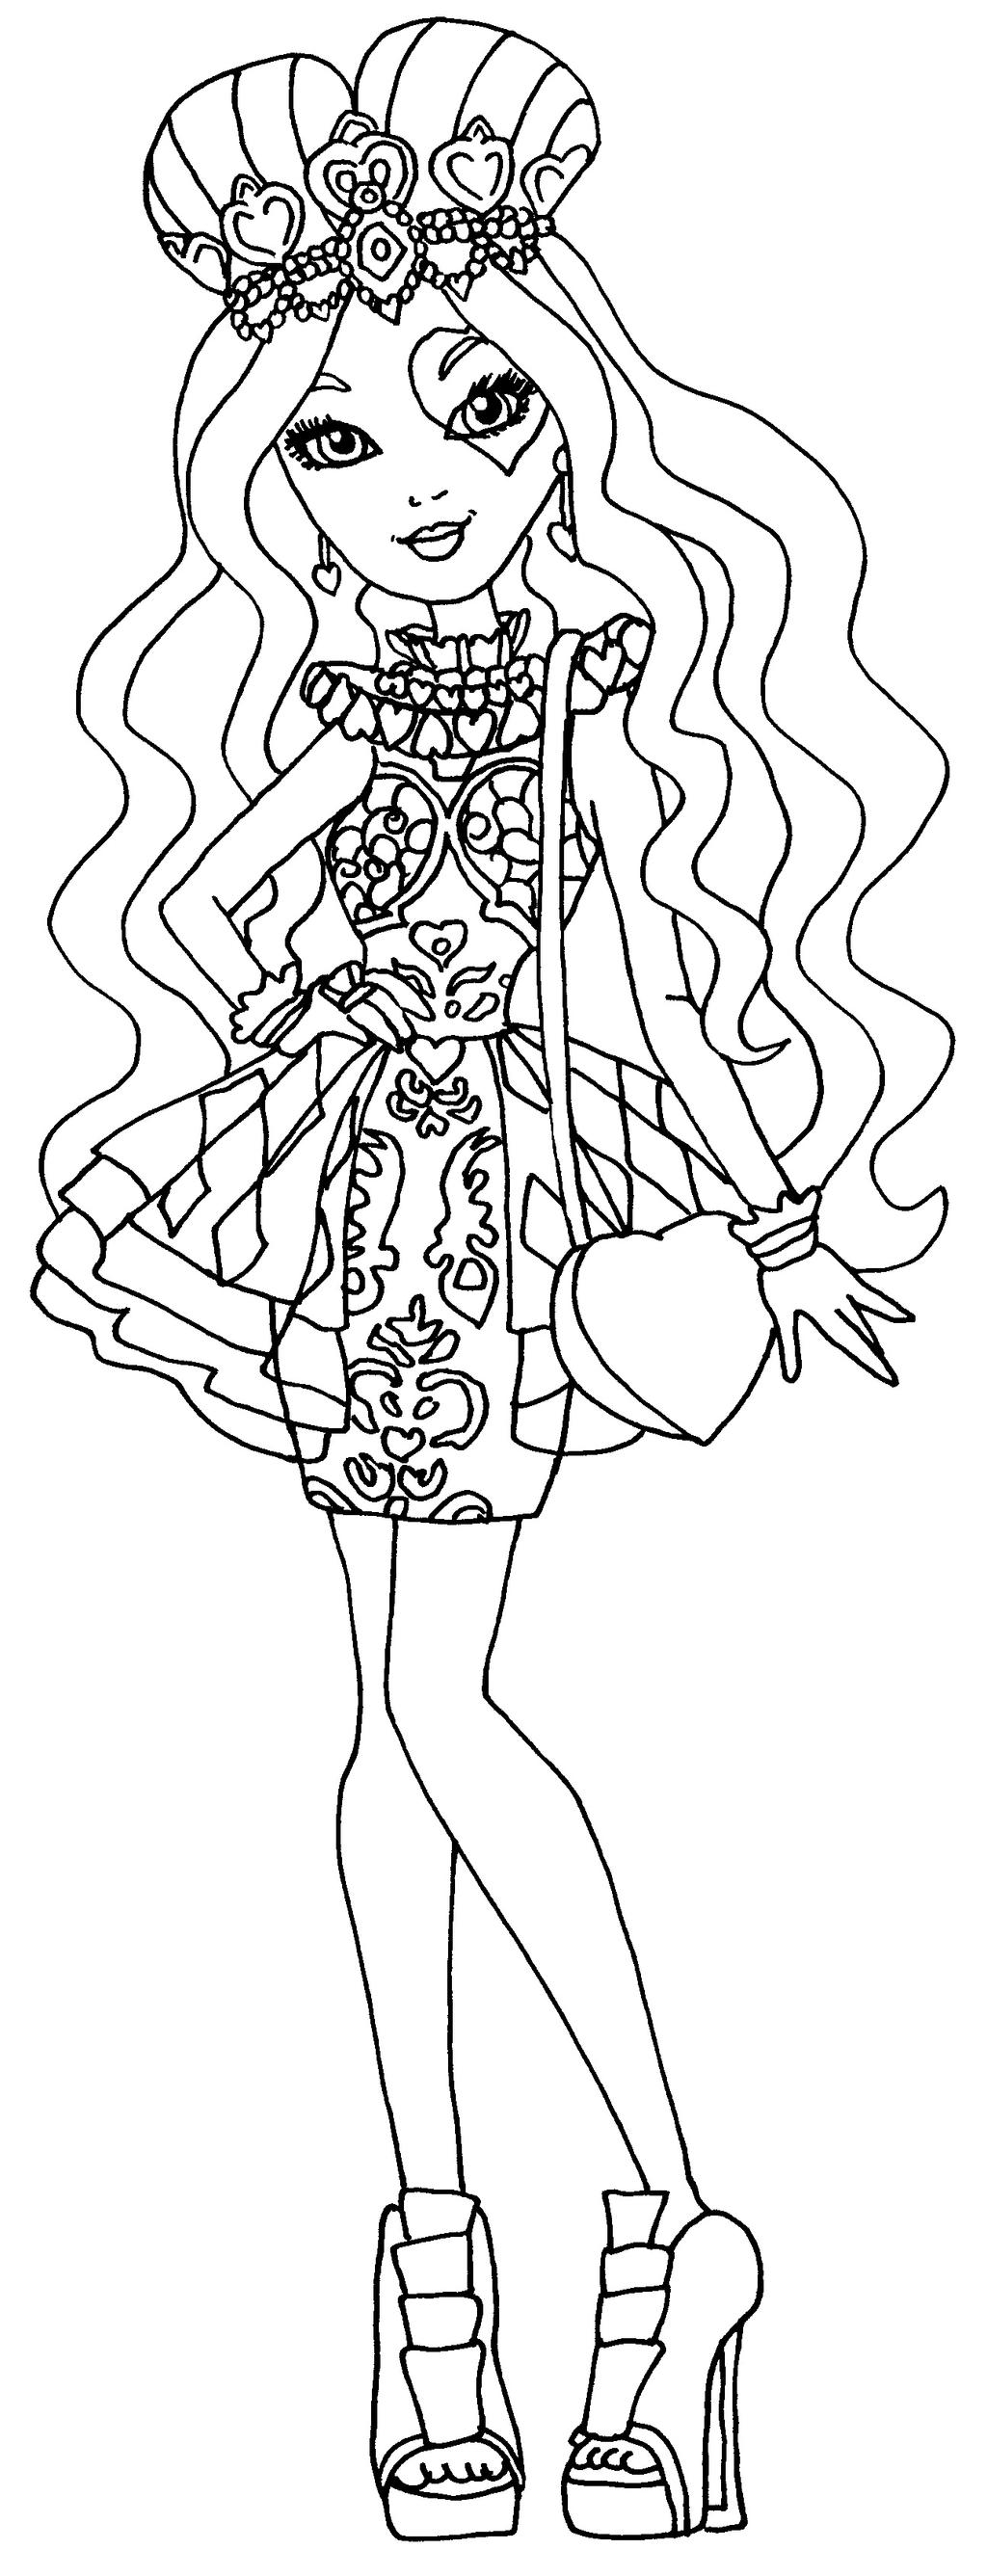 yellow hair after coloring pages for children - photo #34